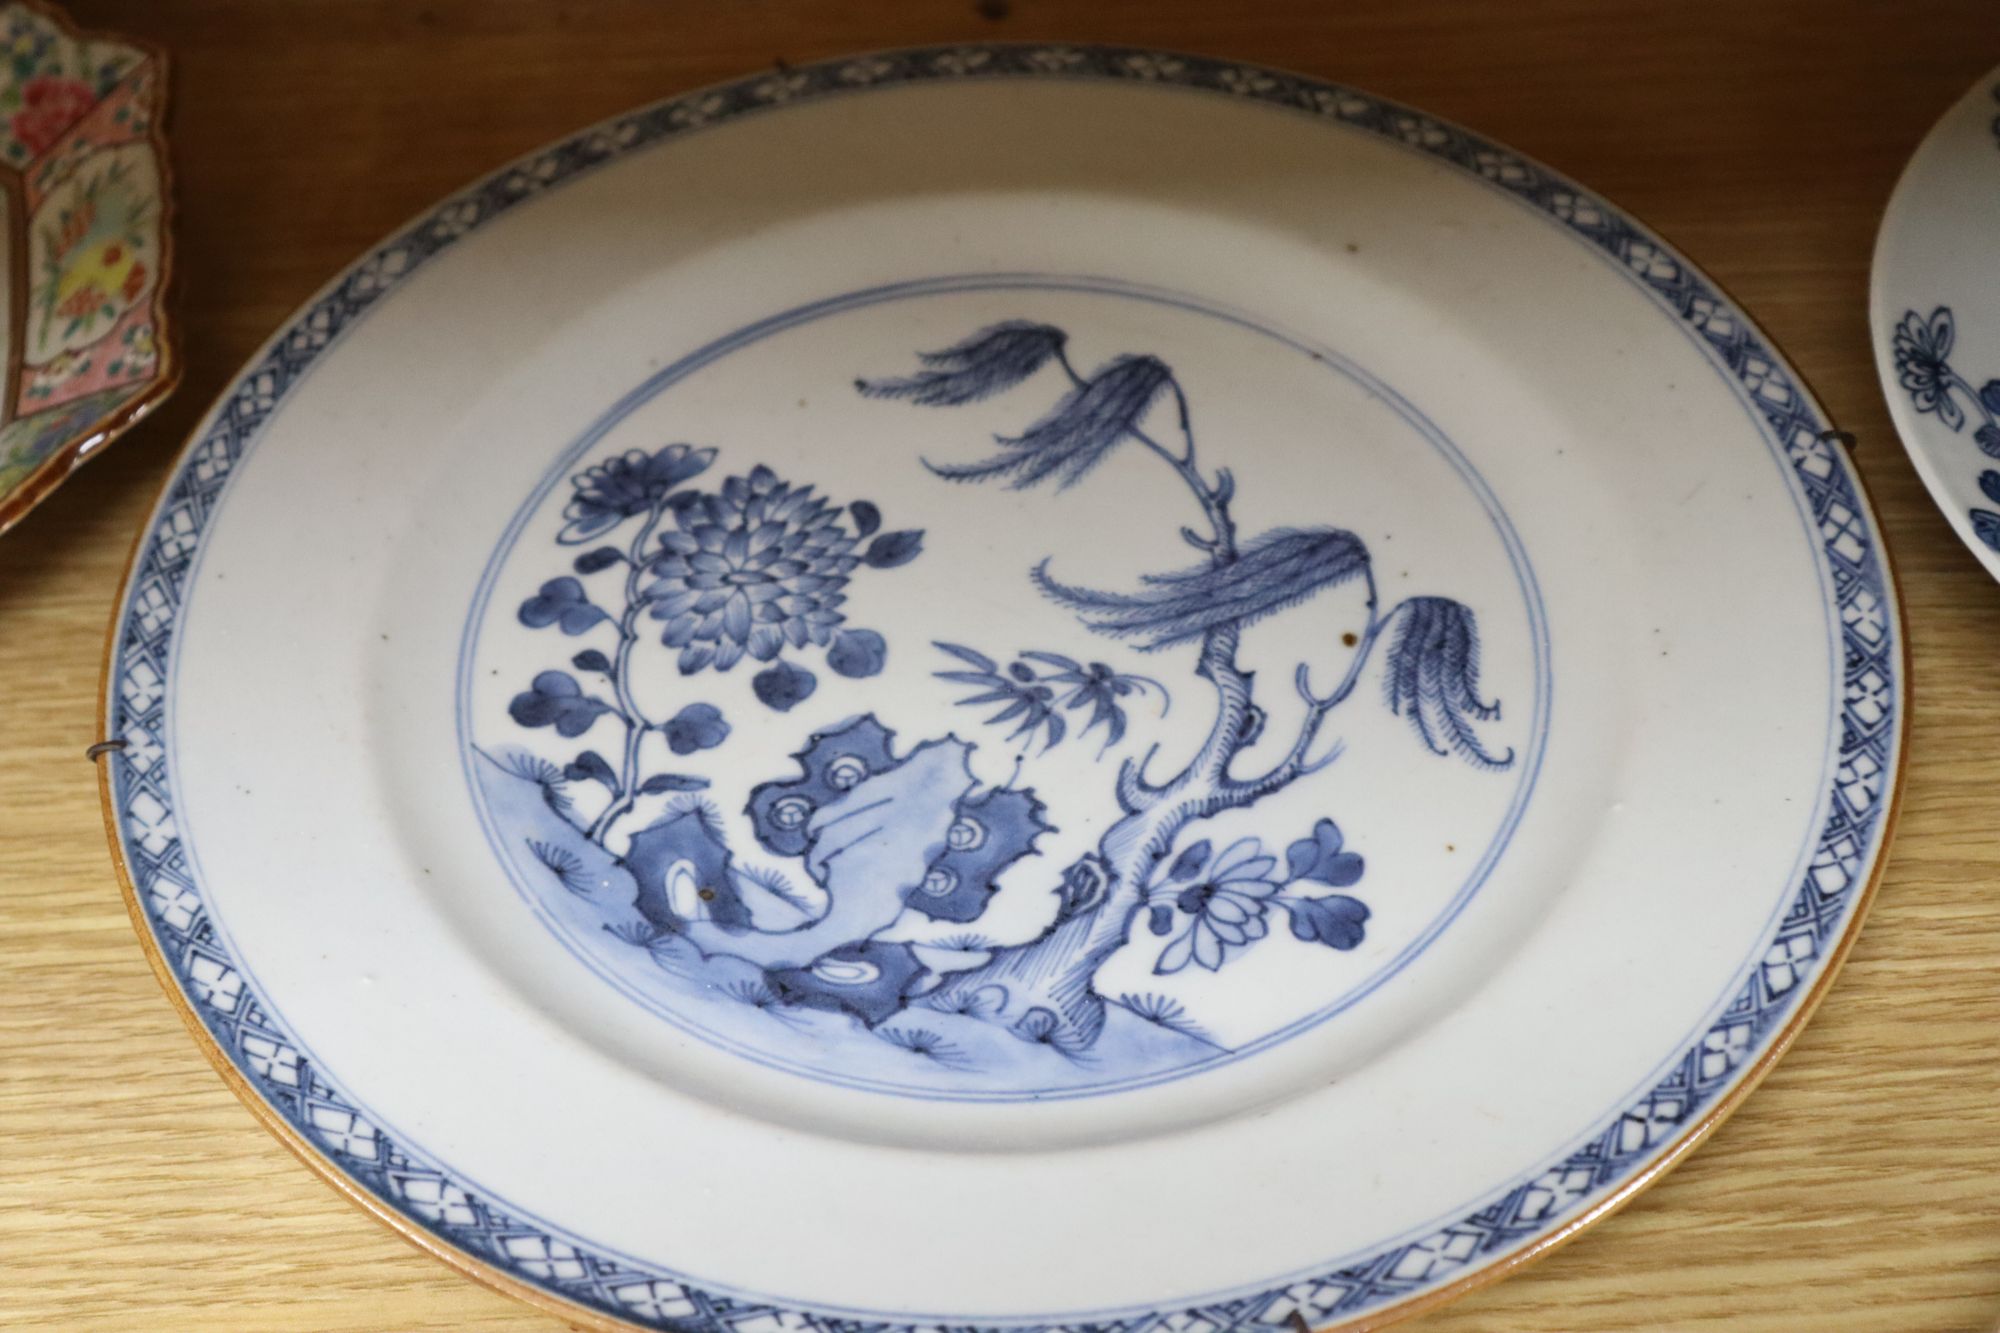 A collection of mostly 18th century Chinese export plates and dishes, a Chinese famille rose dish and another similar smaller dish